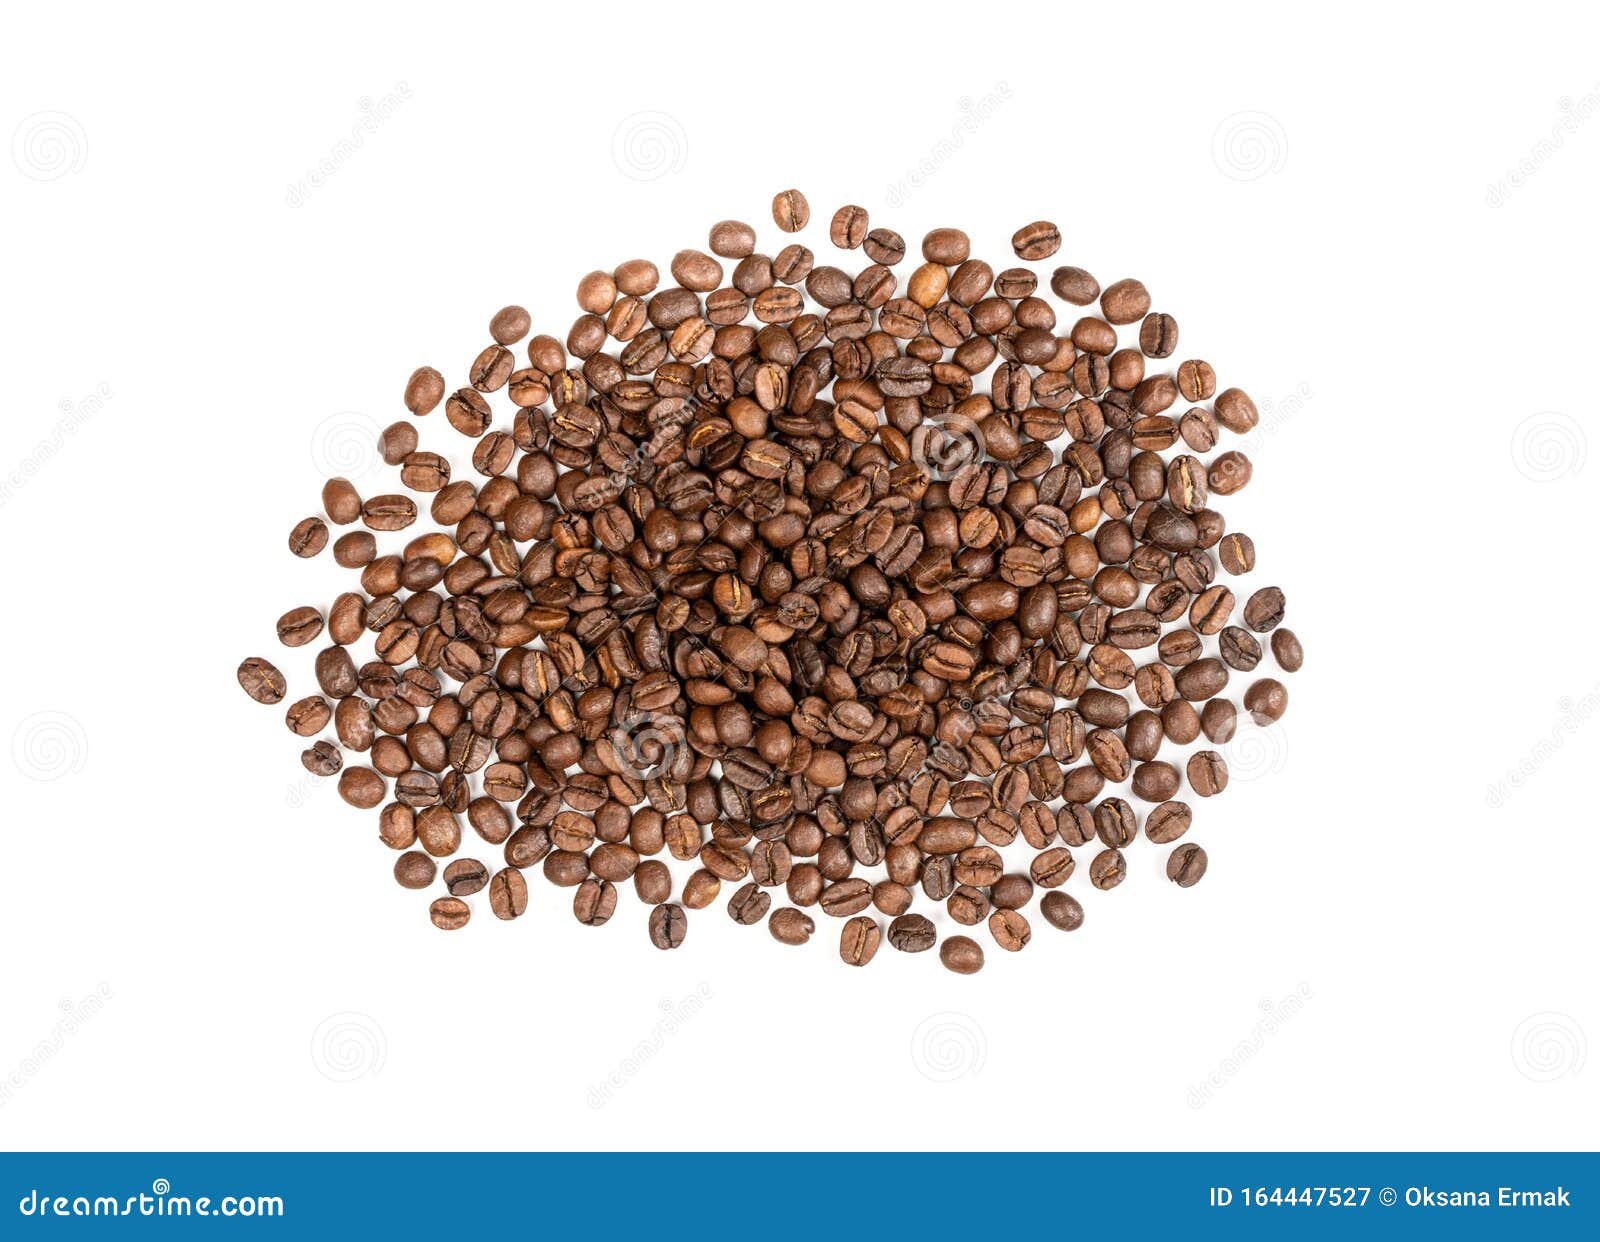 heap of brown coffee beans  on white background